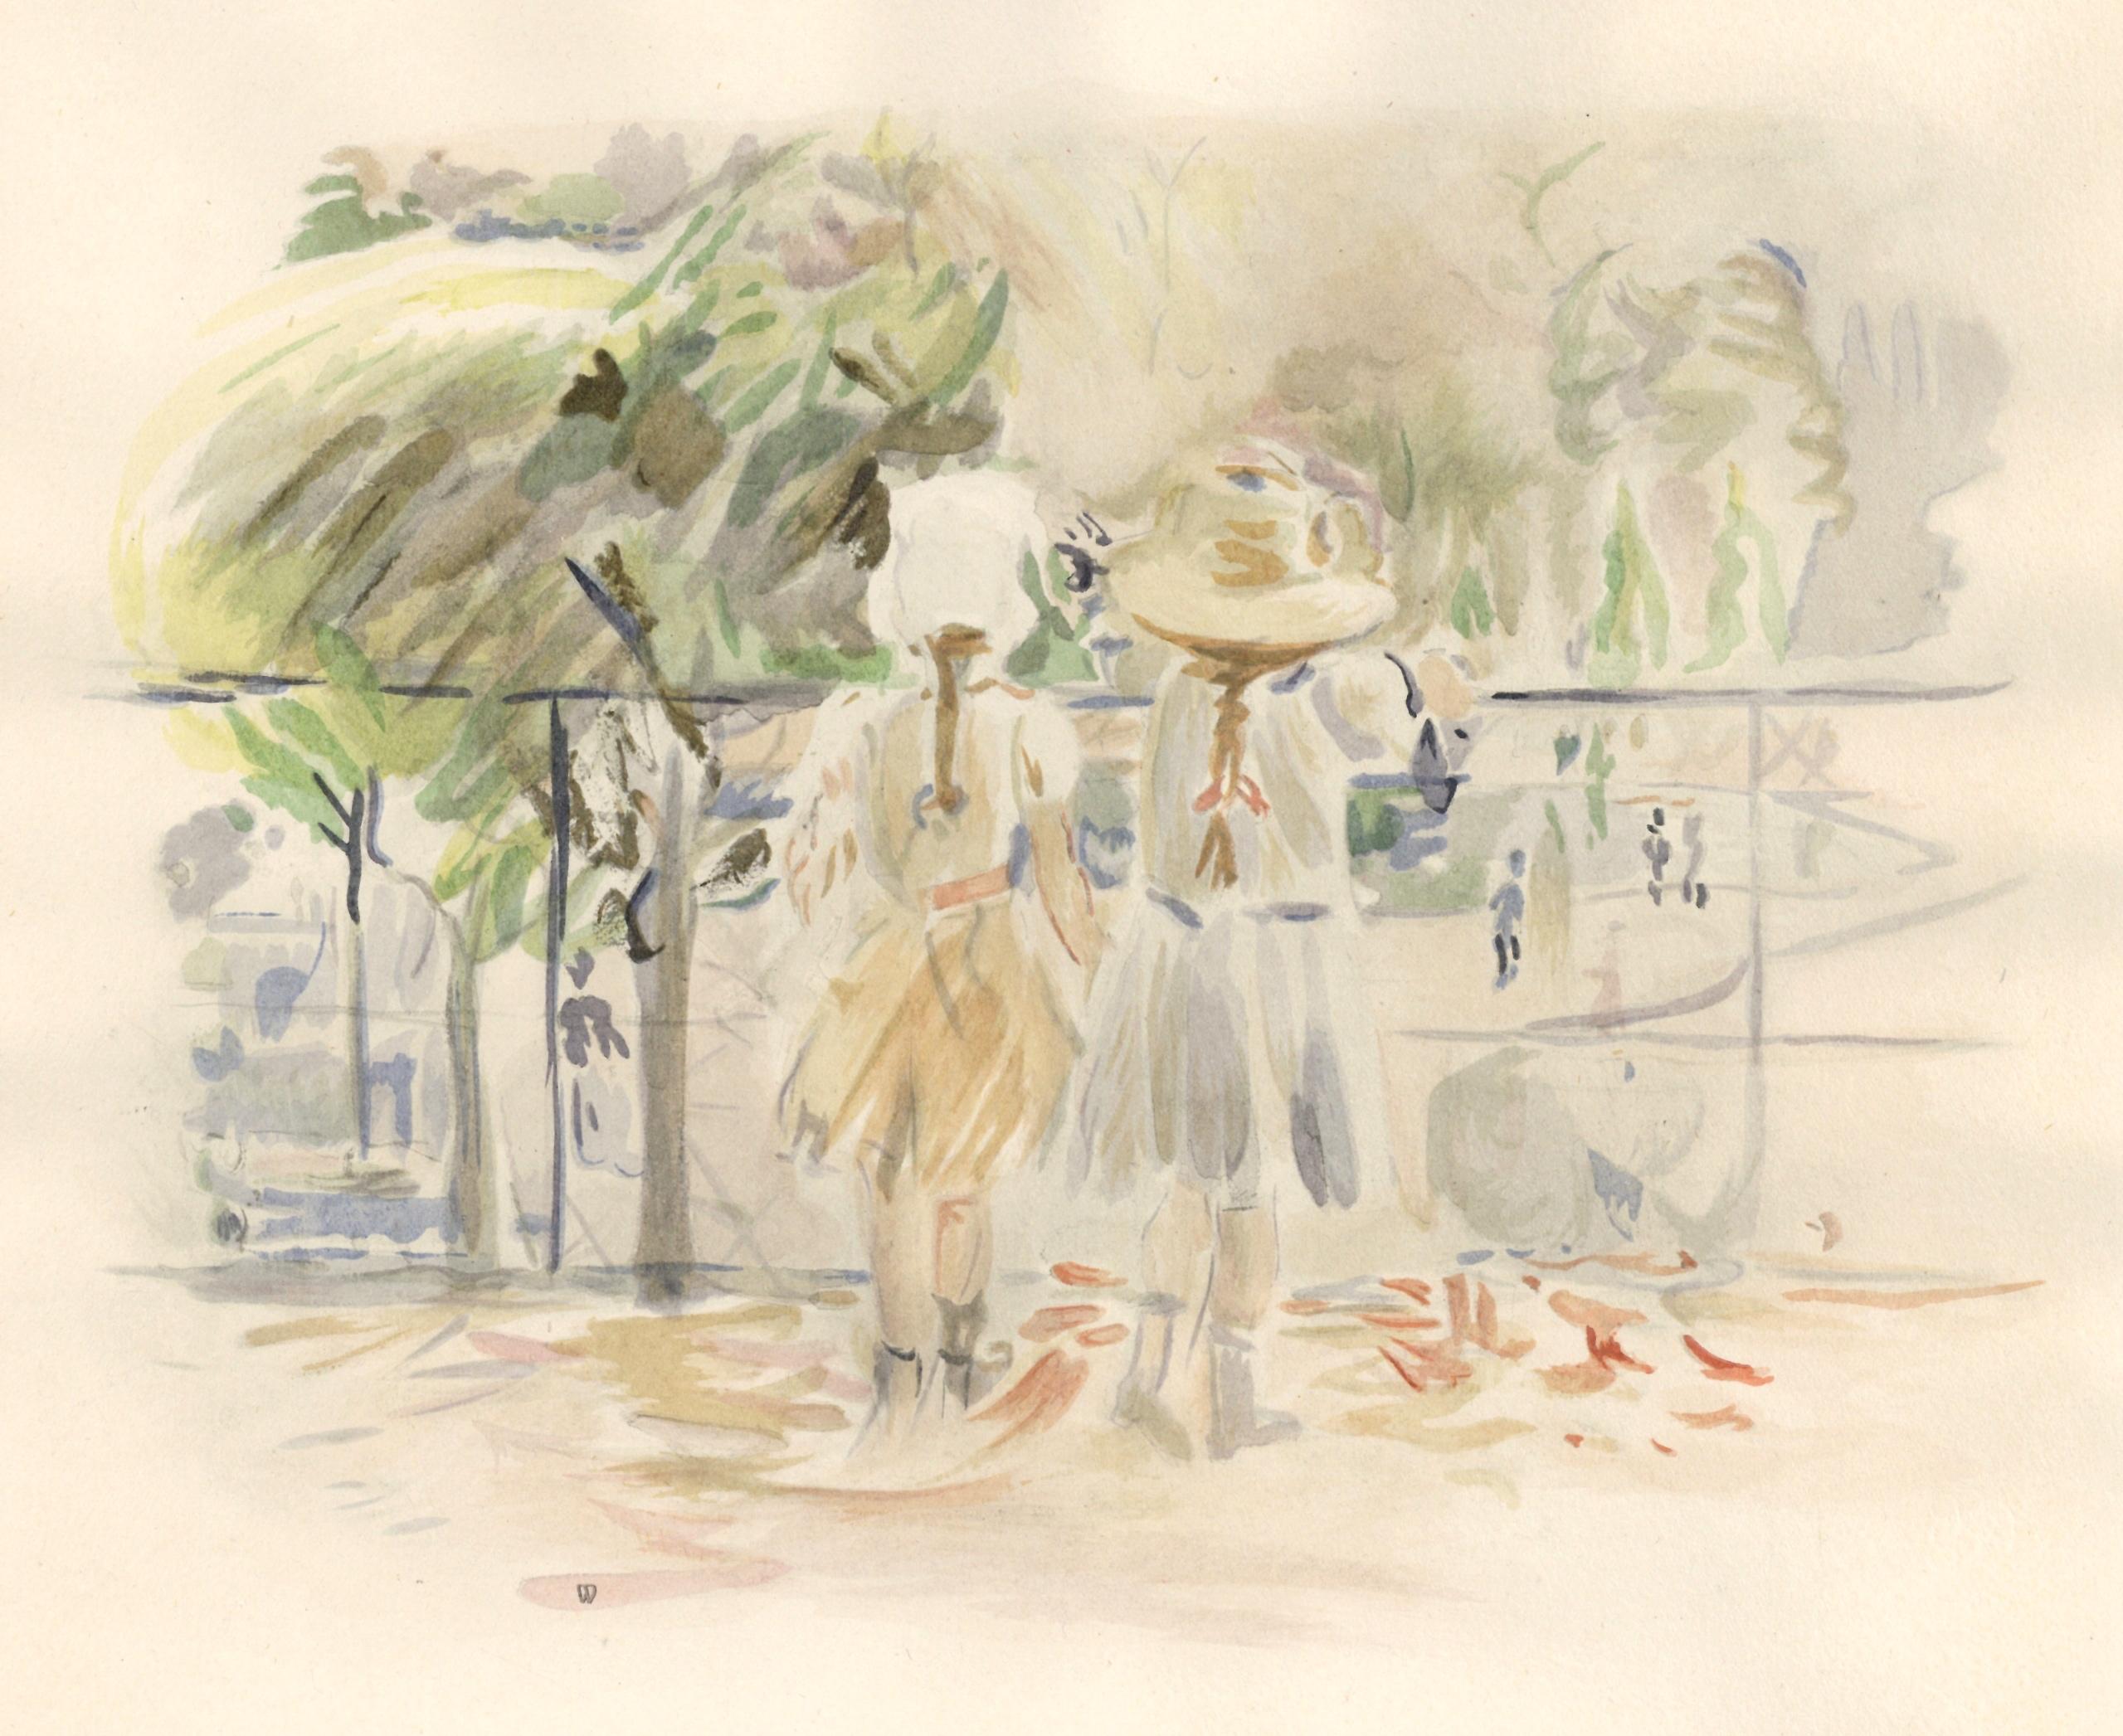 Medium: pochoir (after the 1885 watercolor). Printed 1946 in a limited edition of 300 for the rare "Berthe Morisot Seize Aquarelles" portfolio, published in Paris by Quatre Chemins. The image measures 8 x 10 inches (195 x 250 mm). The total sheet